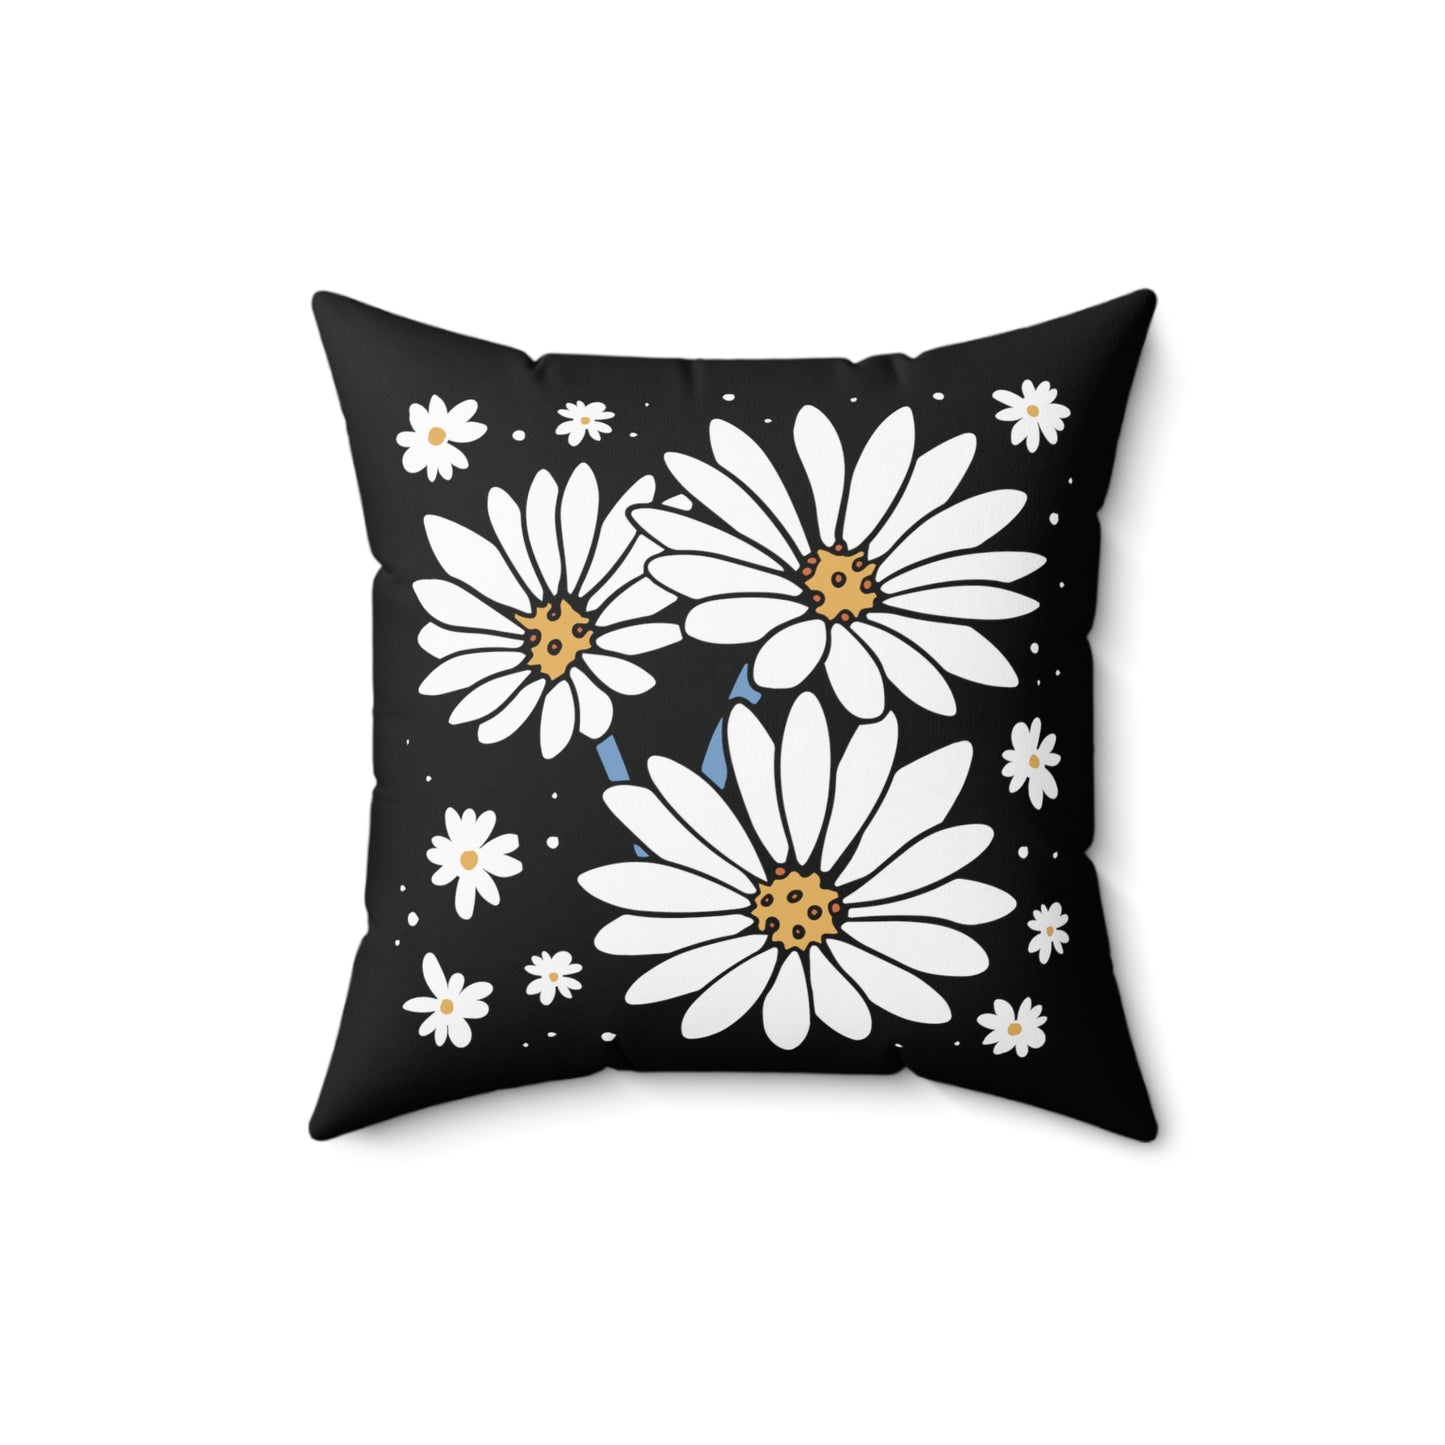 Daisy Flower Square Pillow